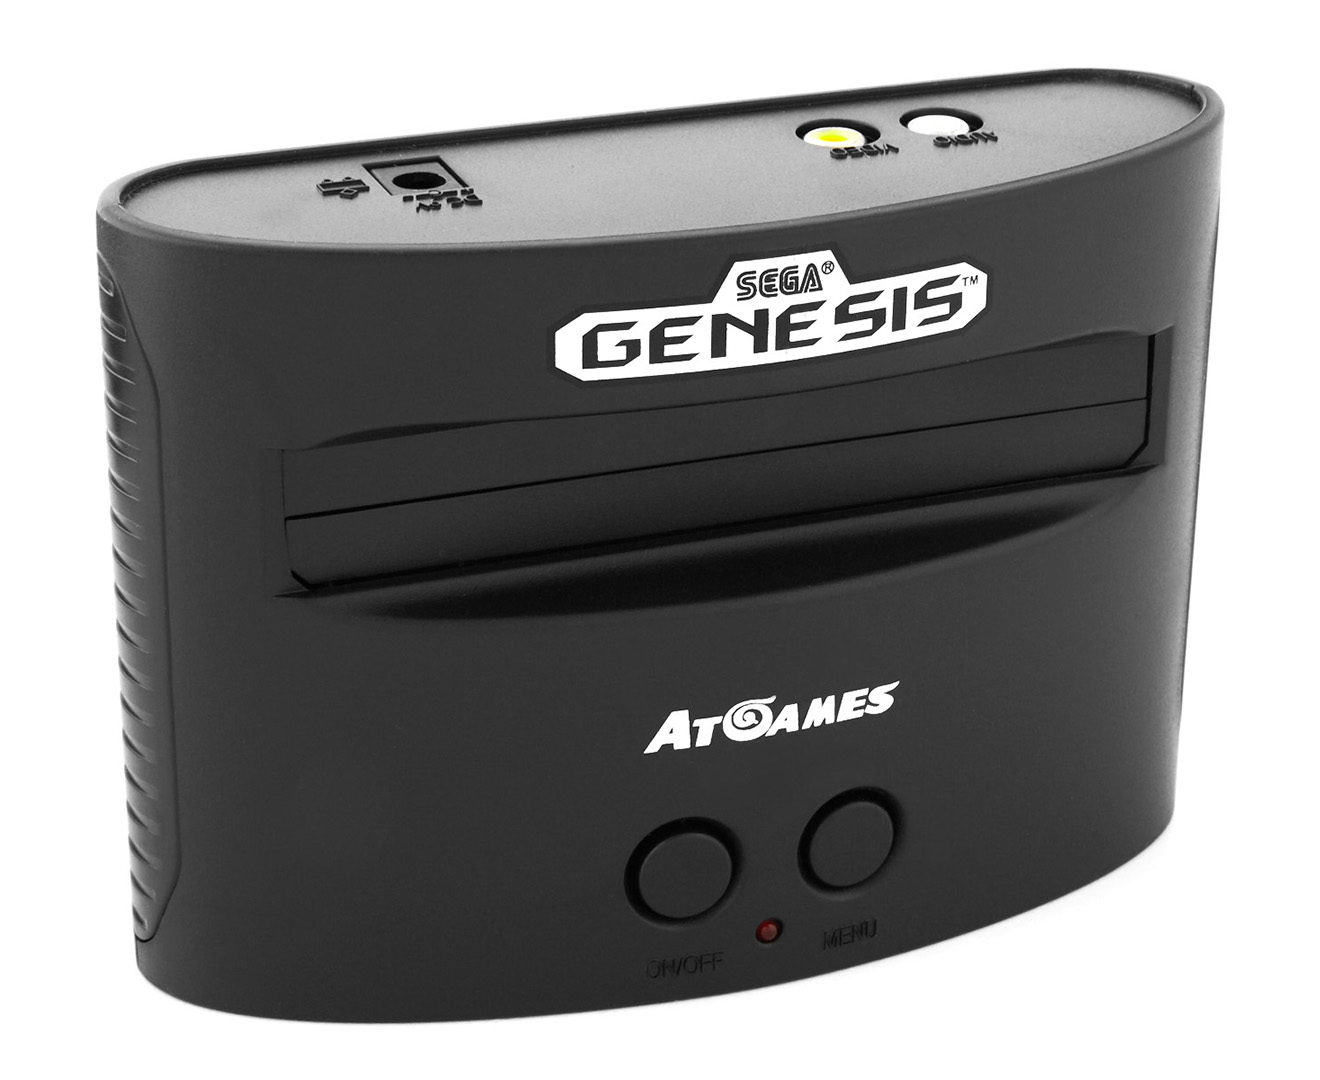 handheld game onsole that plays genis games